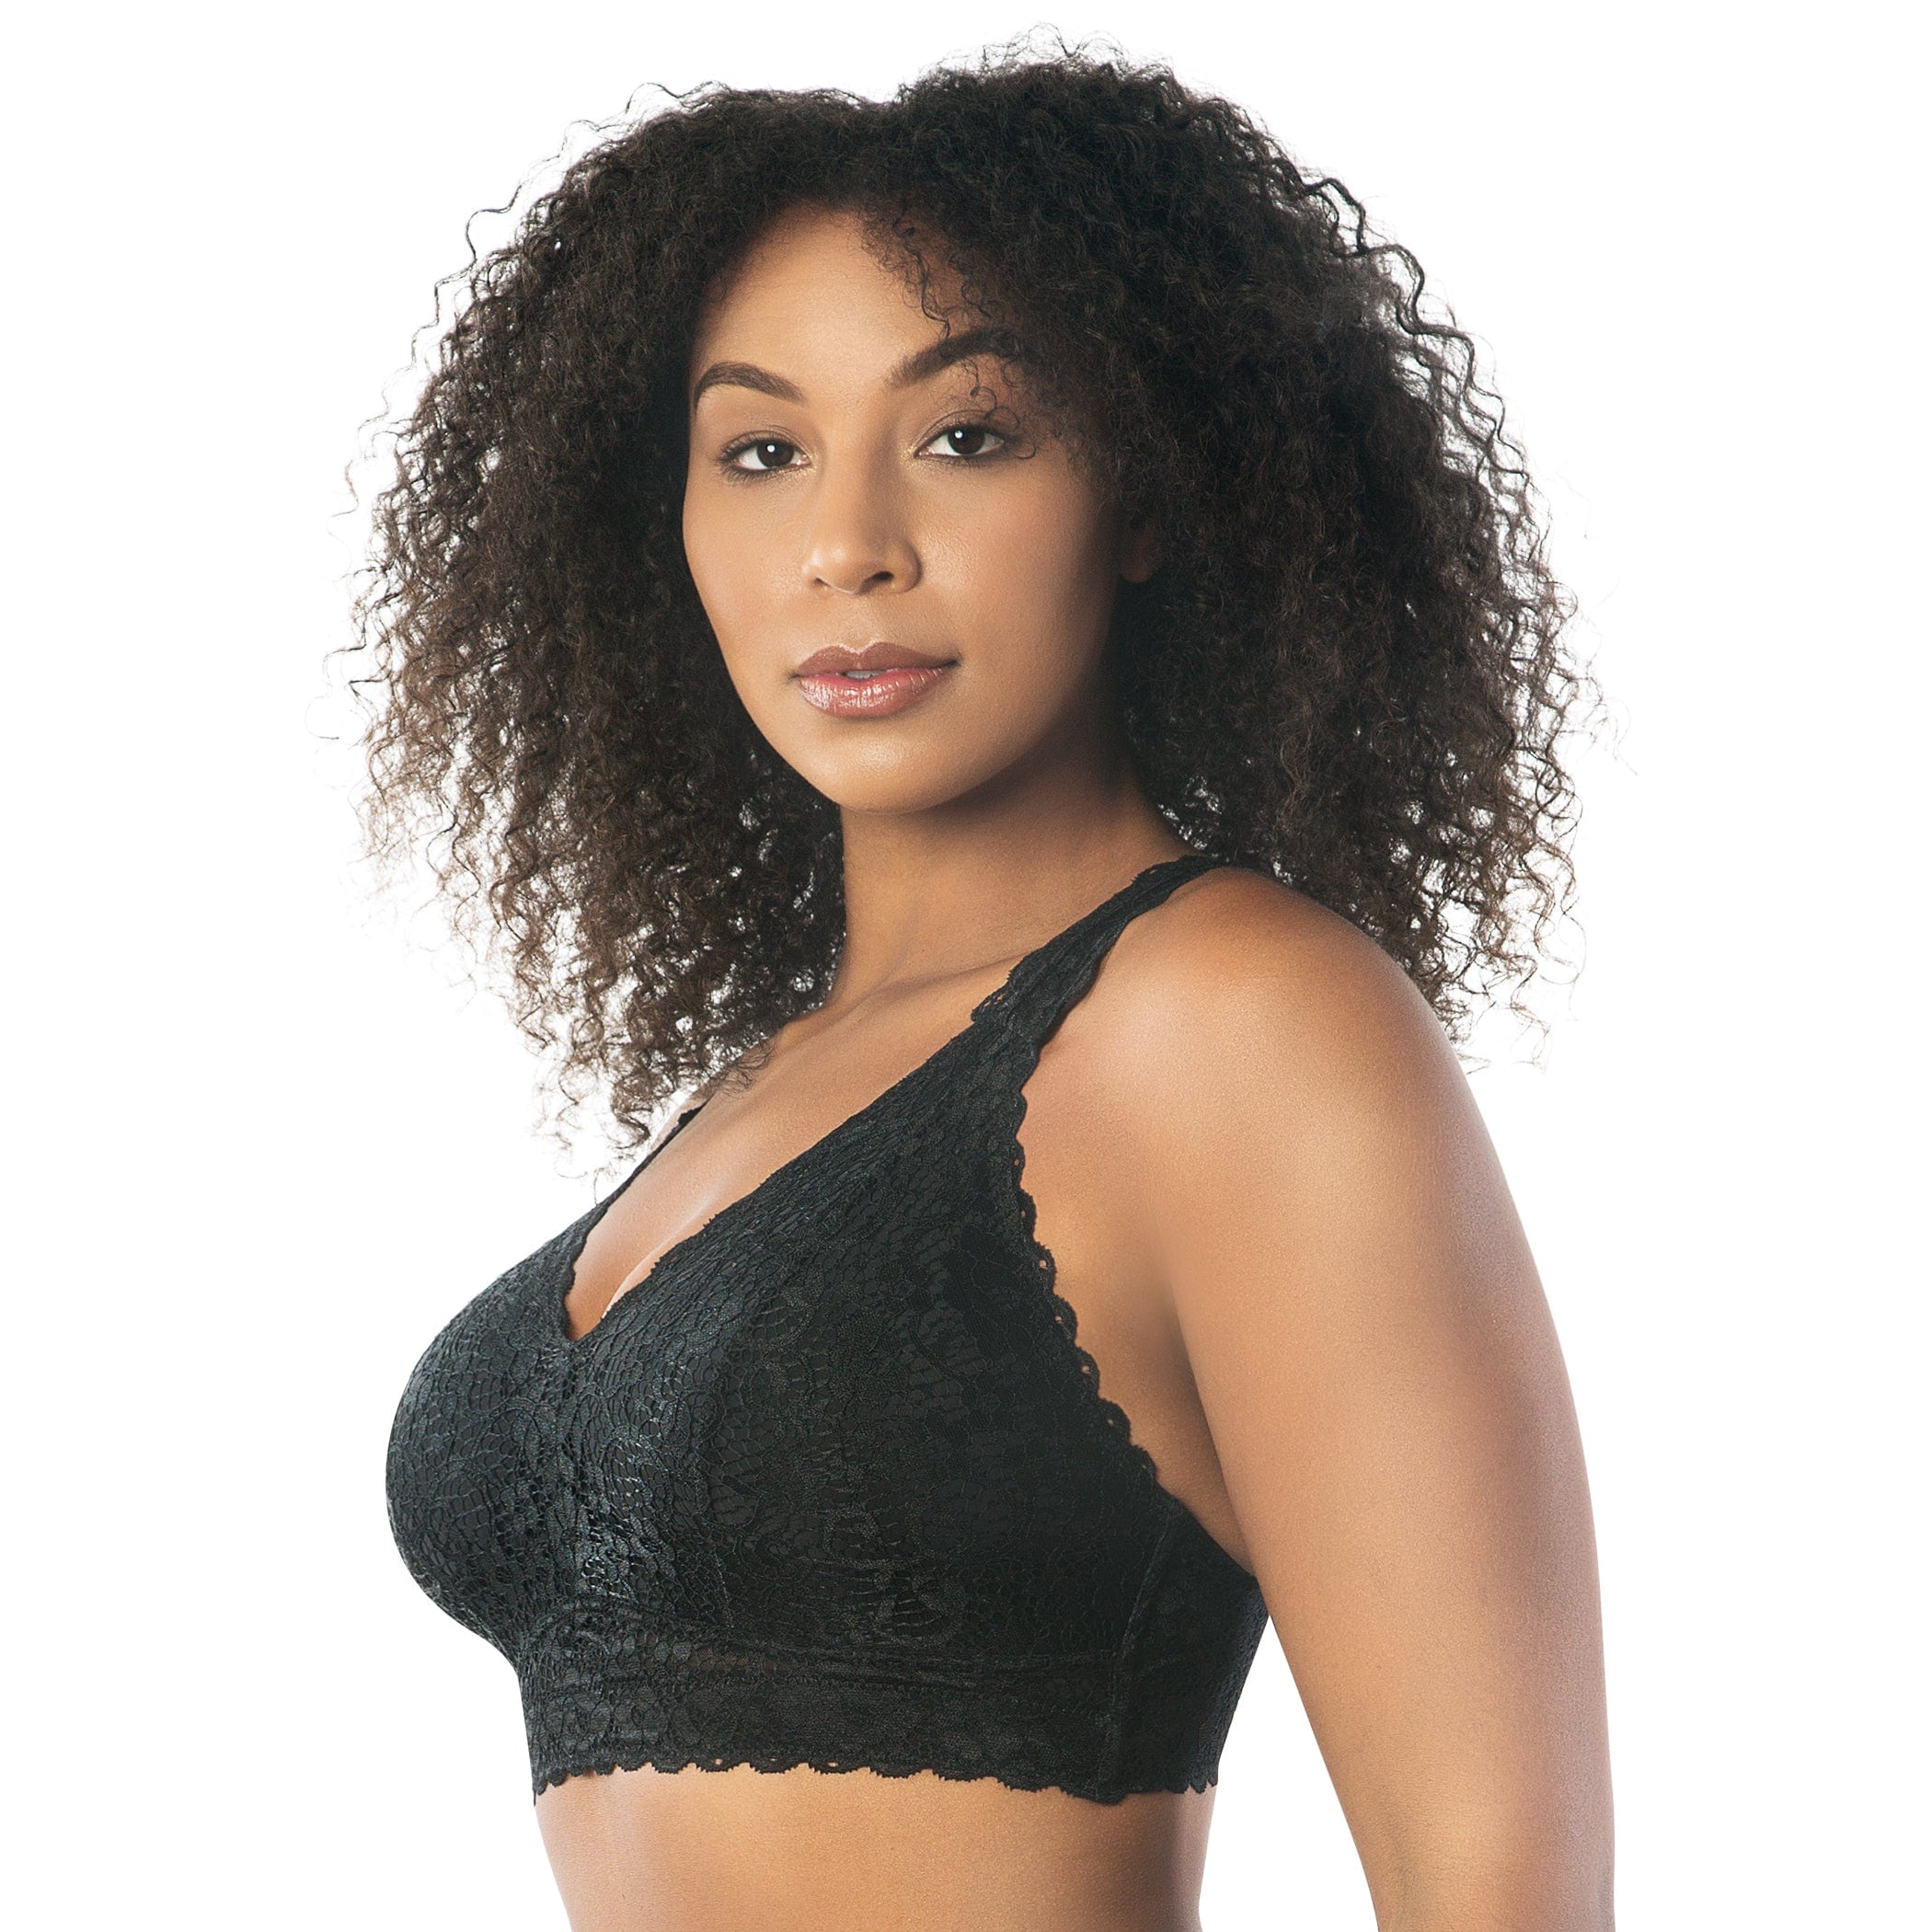 New 201202 Womens Natural Silk Convertible Bra 88% Density, 12% Spandex  Wire, Unpadded, Everyday Wear White/Black/Pink From Dou05, $15.09